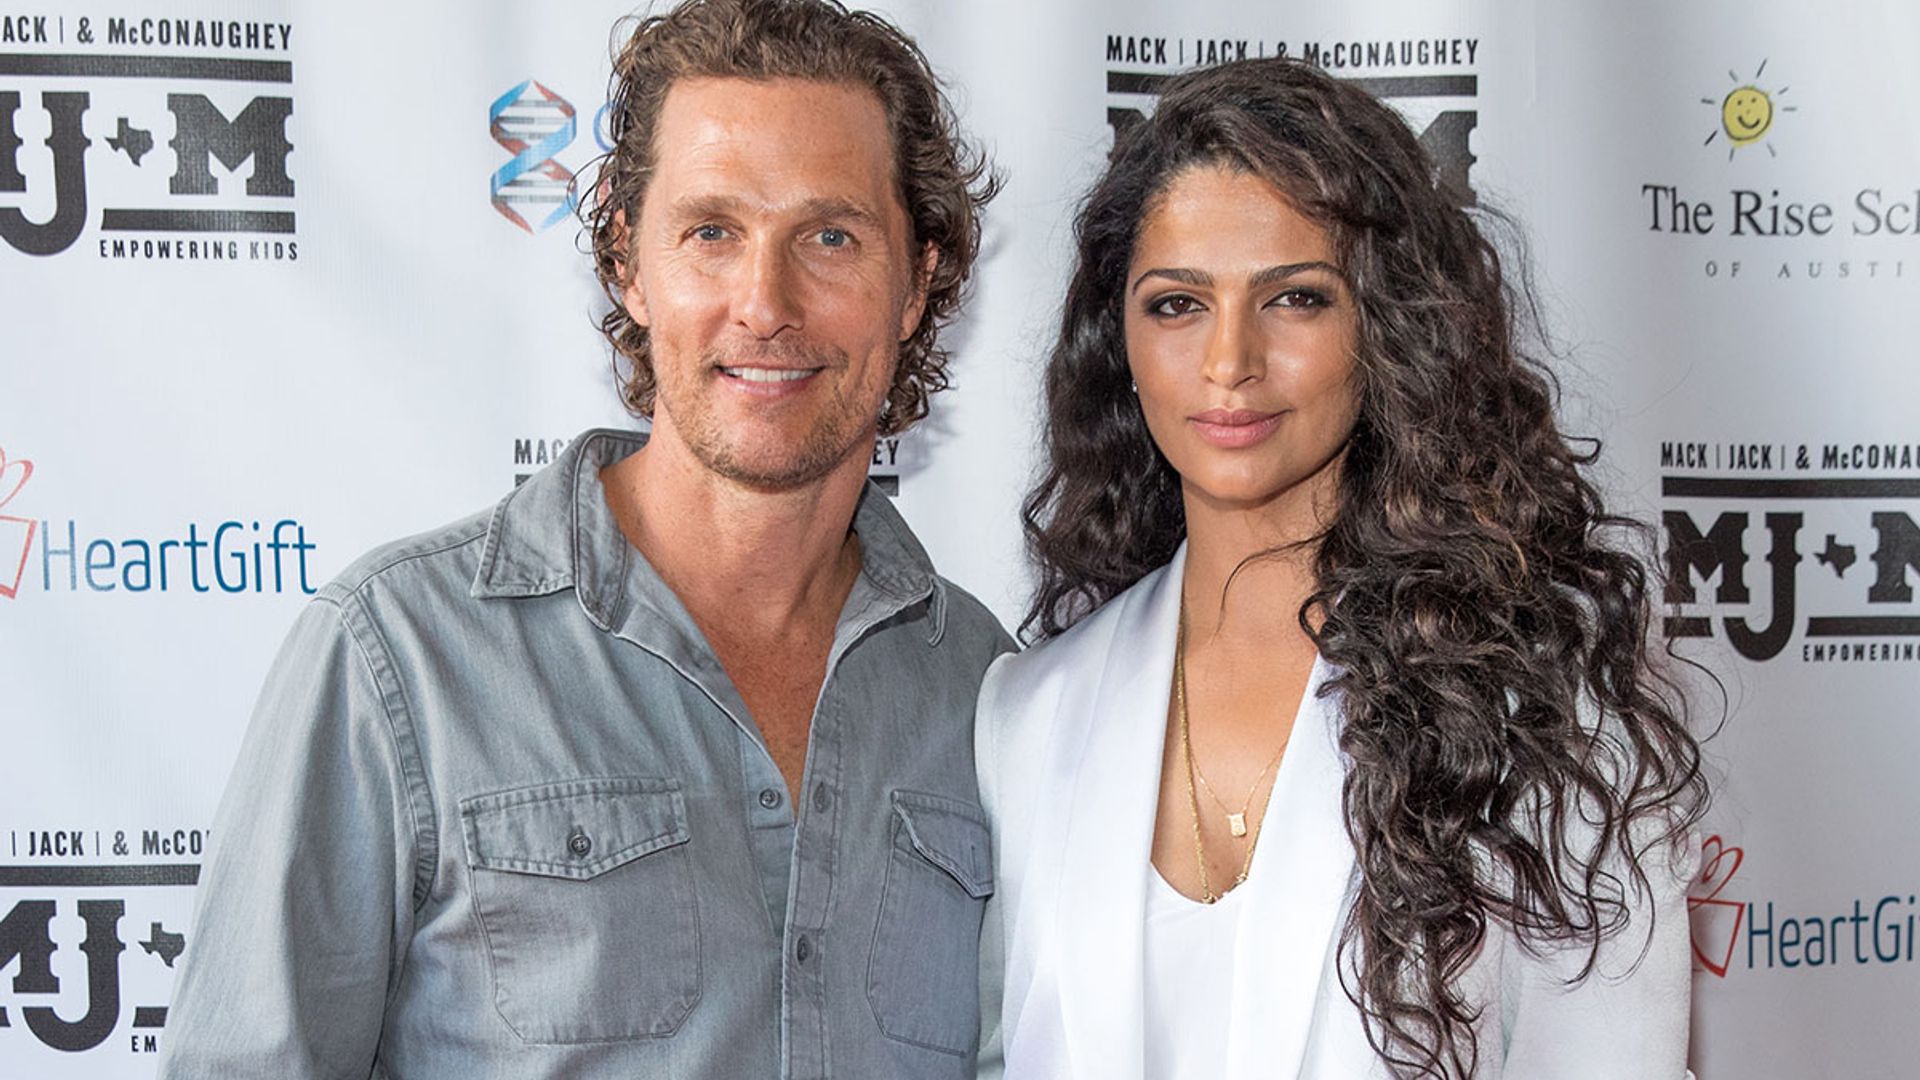 Matthew McConaughey and wife Camila Alves' relationship timeline